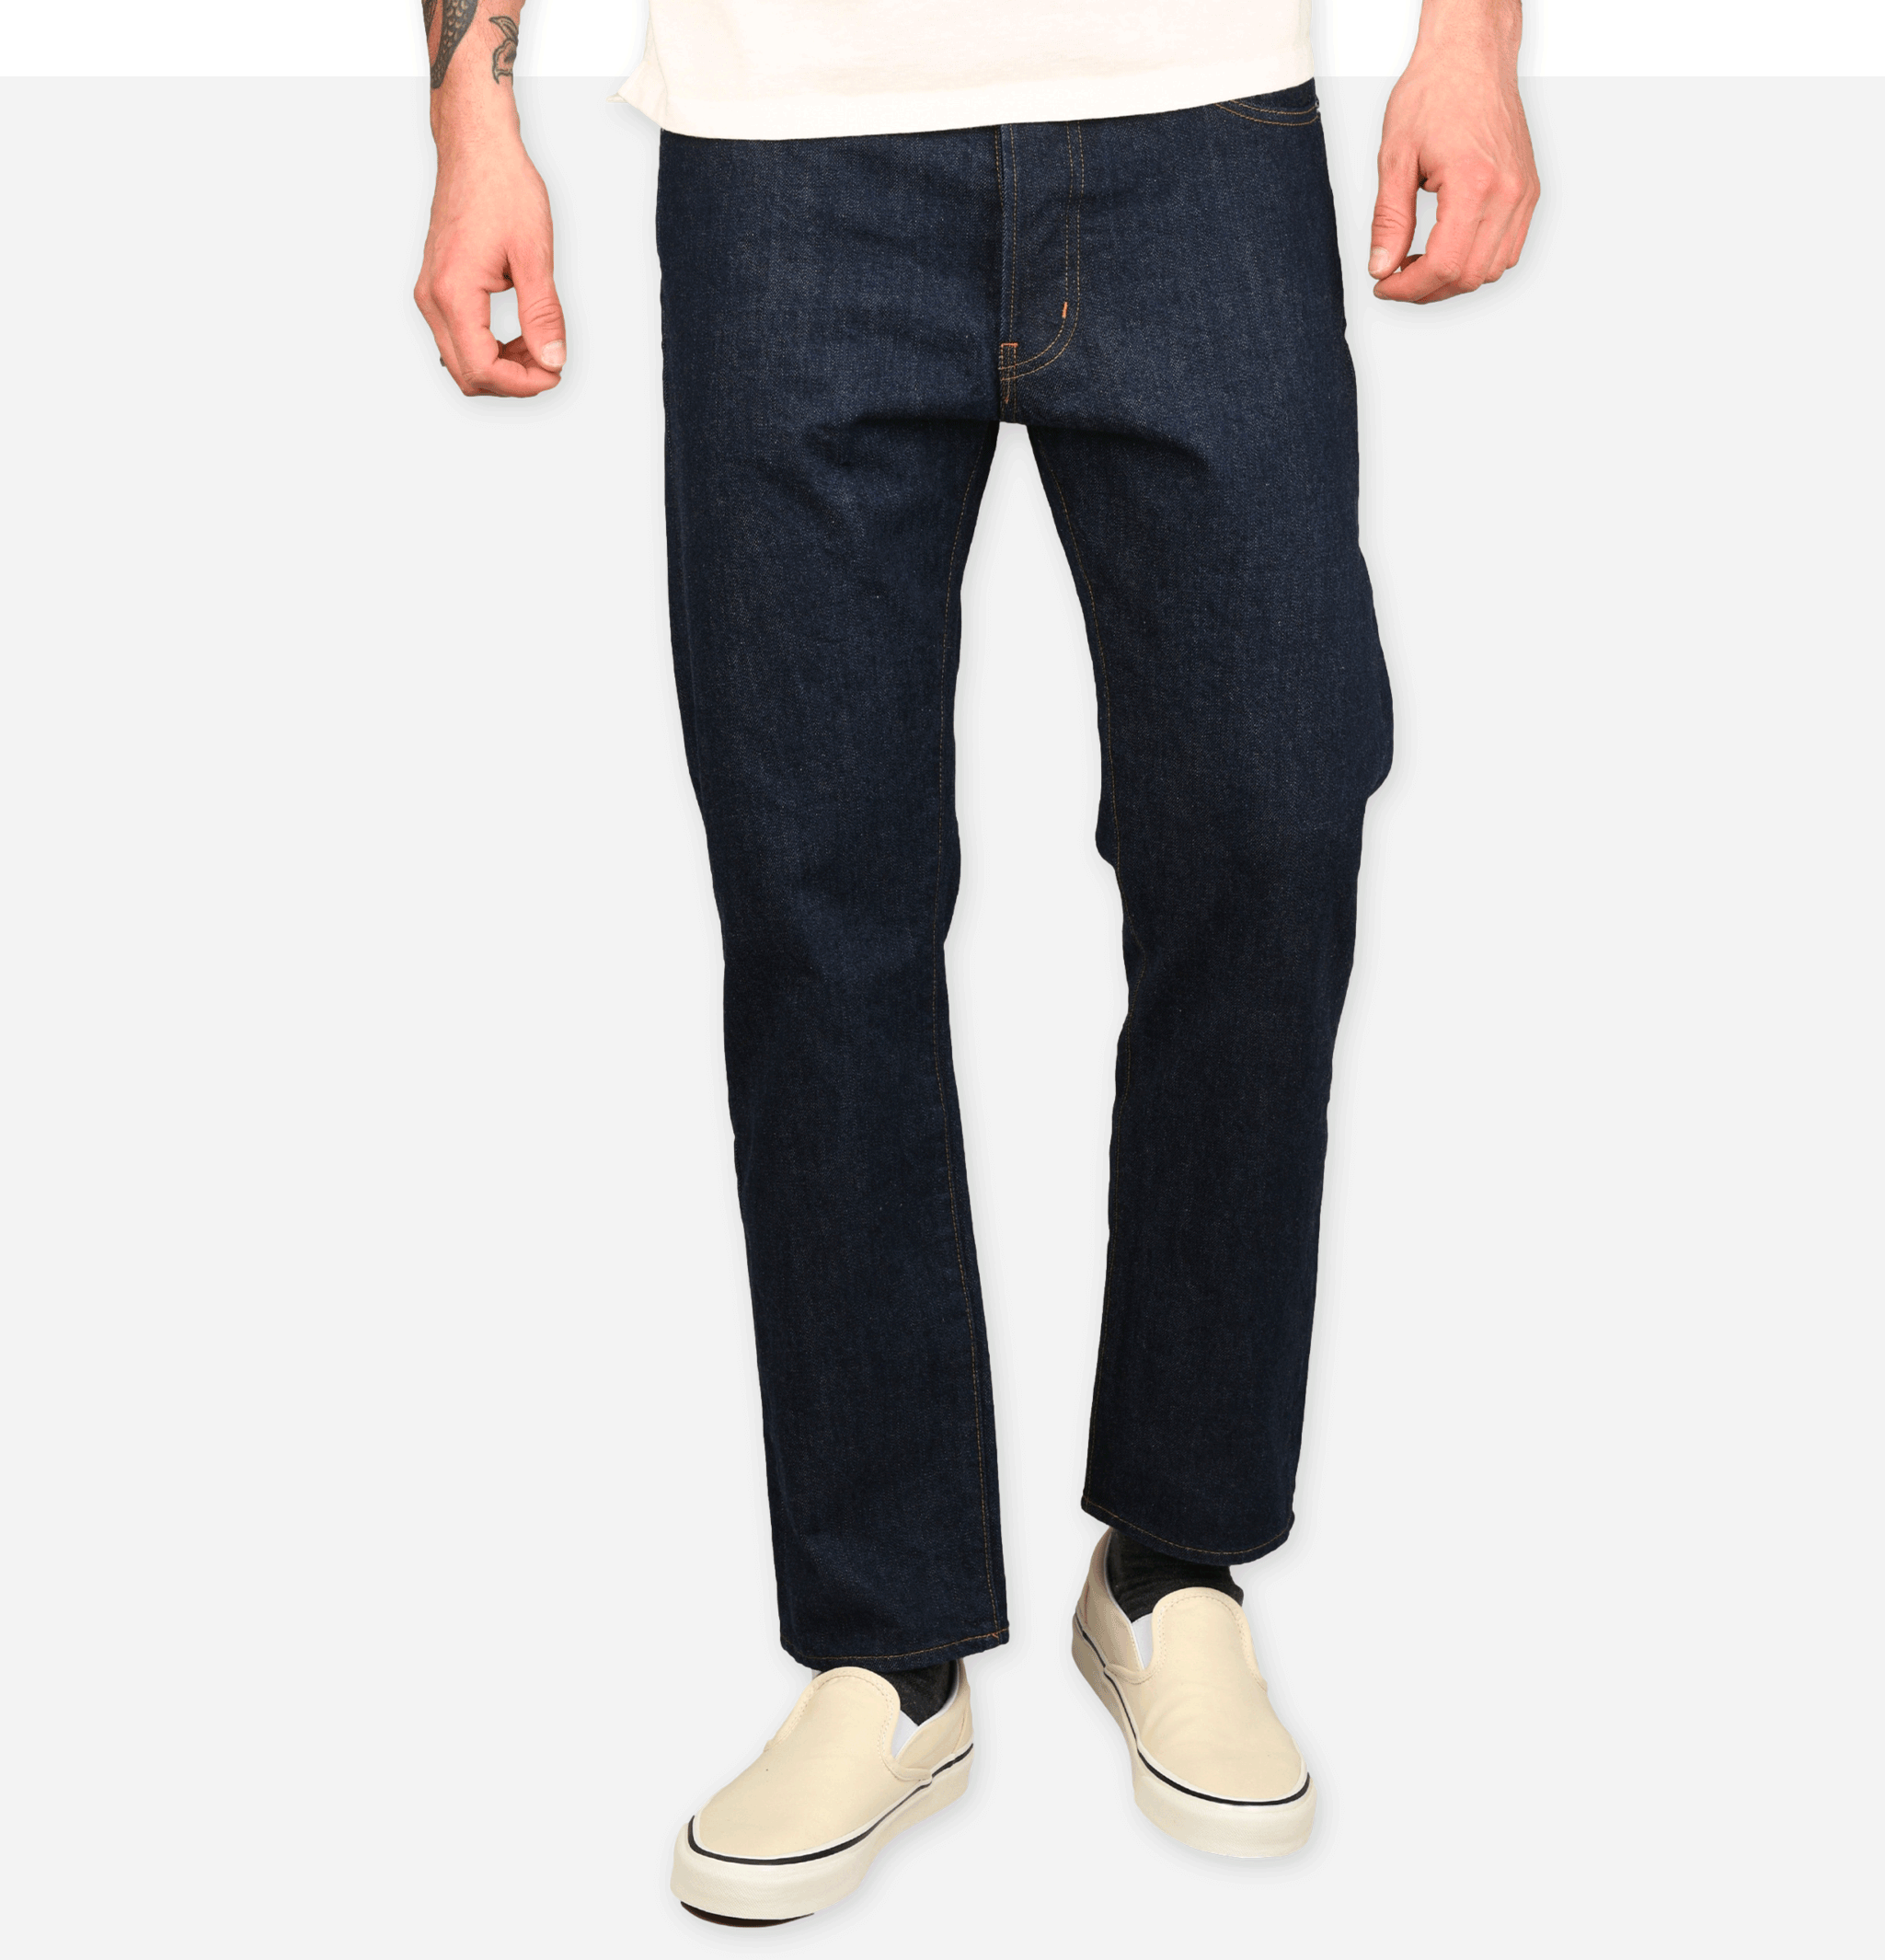 Ankle Jeans One Wash Denim